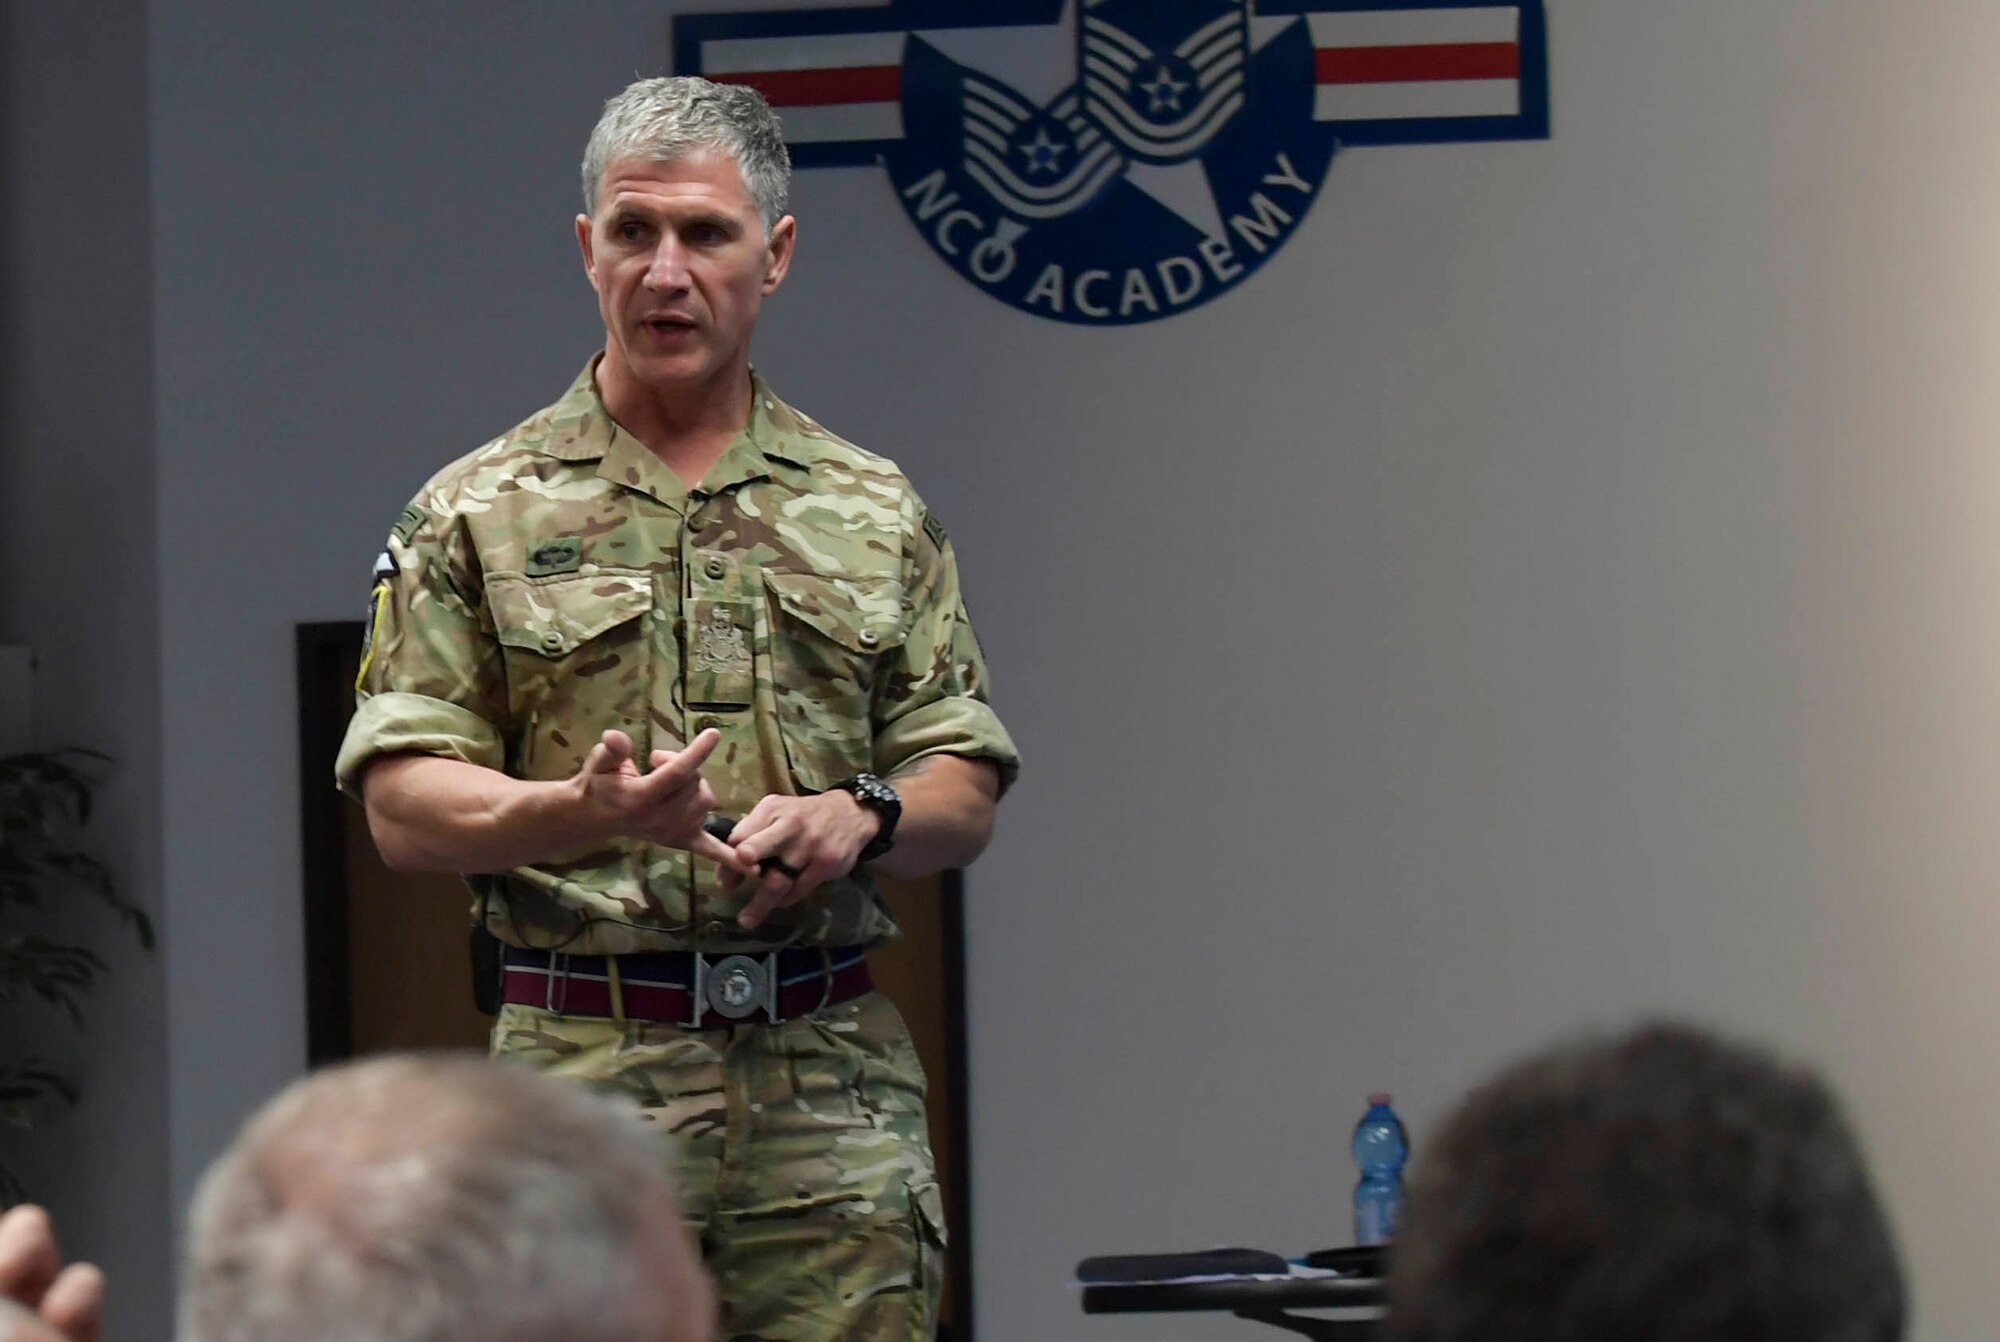 Warrant Officer Jake Alpert, command senior enlisted leader NATO Allied Air Command, gives a brief during the first European Air Forces Senior Enlisted Conference at Kisling NCO Academy, Kapaun Air Station, Germany, May 21, 2019. Participants from 19 countries, including the United States, discussed multiple topics to help enhance personal growth, increase interoperability, and build partnership capacity. (U.S. Navy photo by Mass Communication Specialist 2nd Class Deanna C. Gonzales)